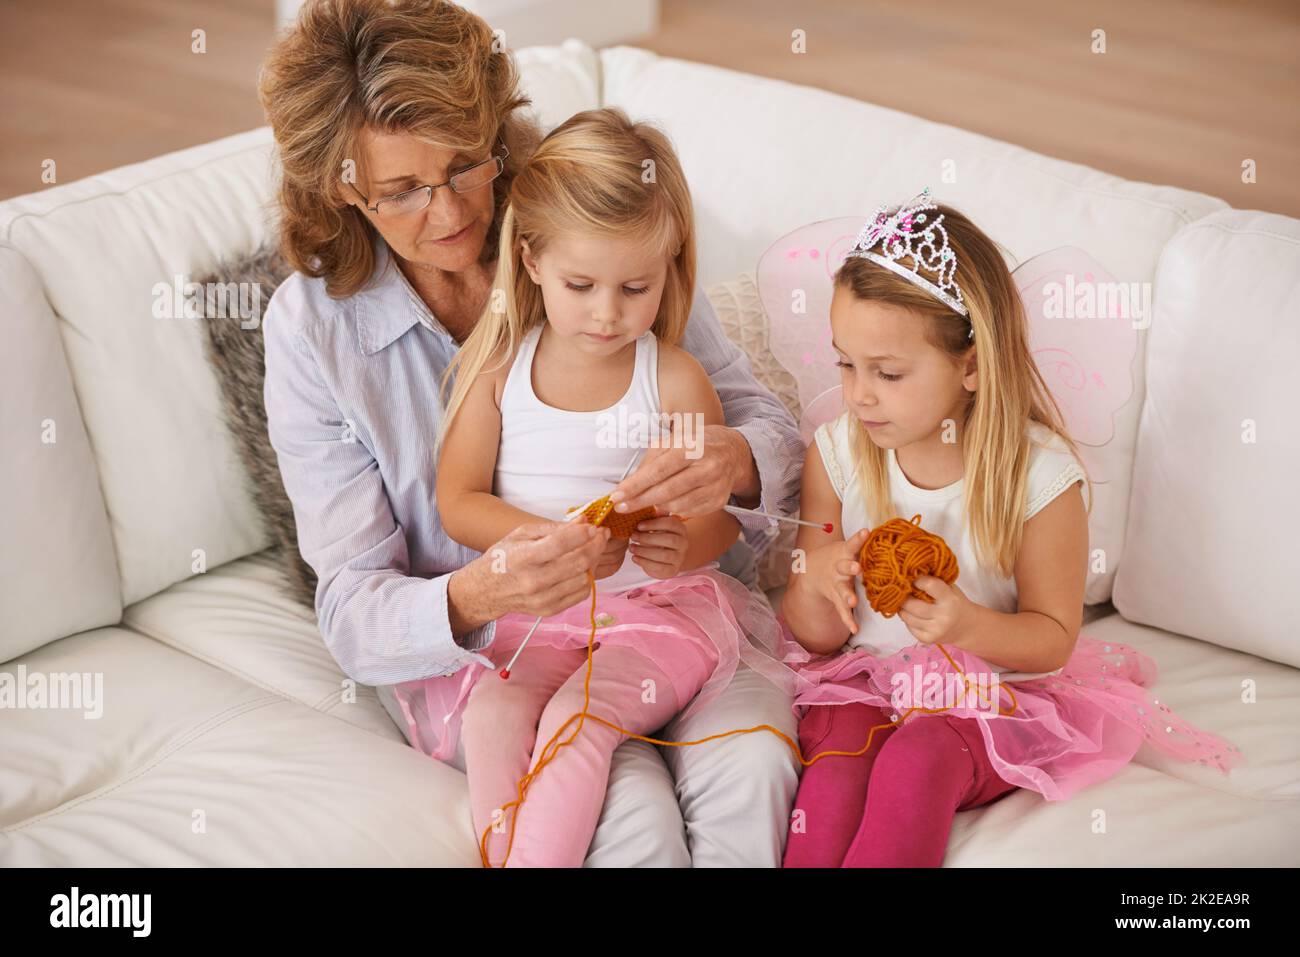 Grannys showing us how to knit. A grandmother spending time with her granddaughter. Stock Photo